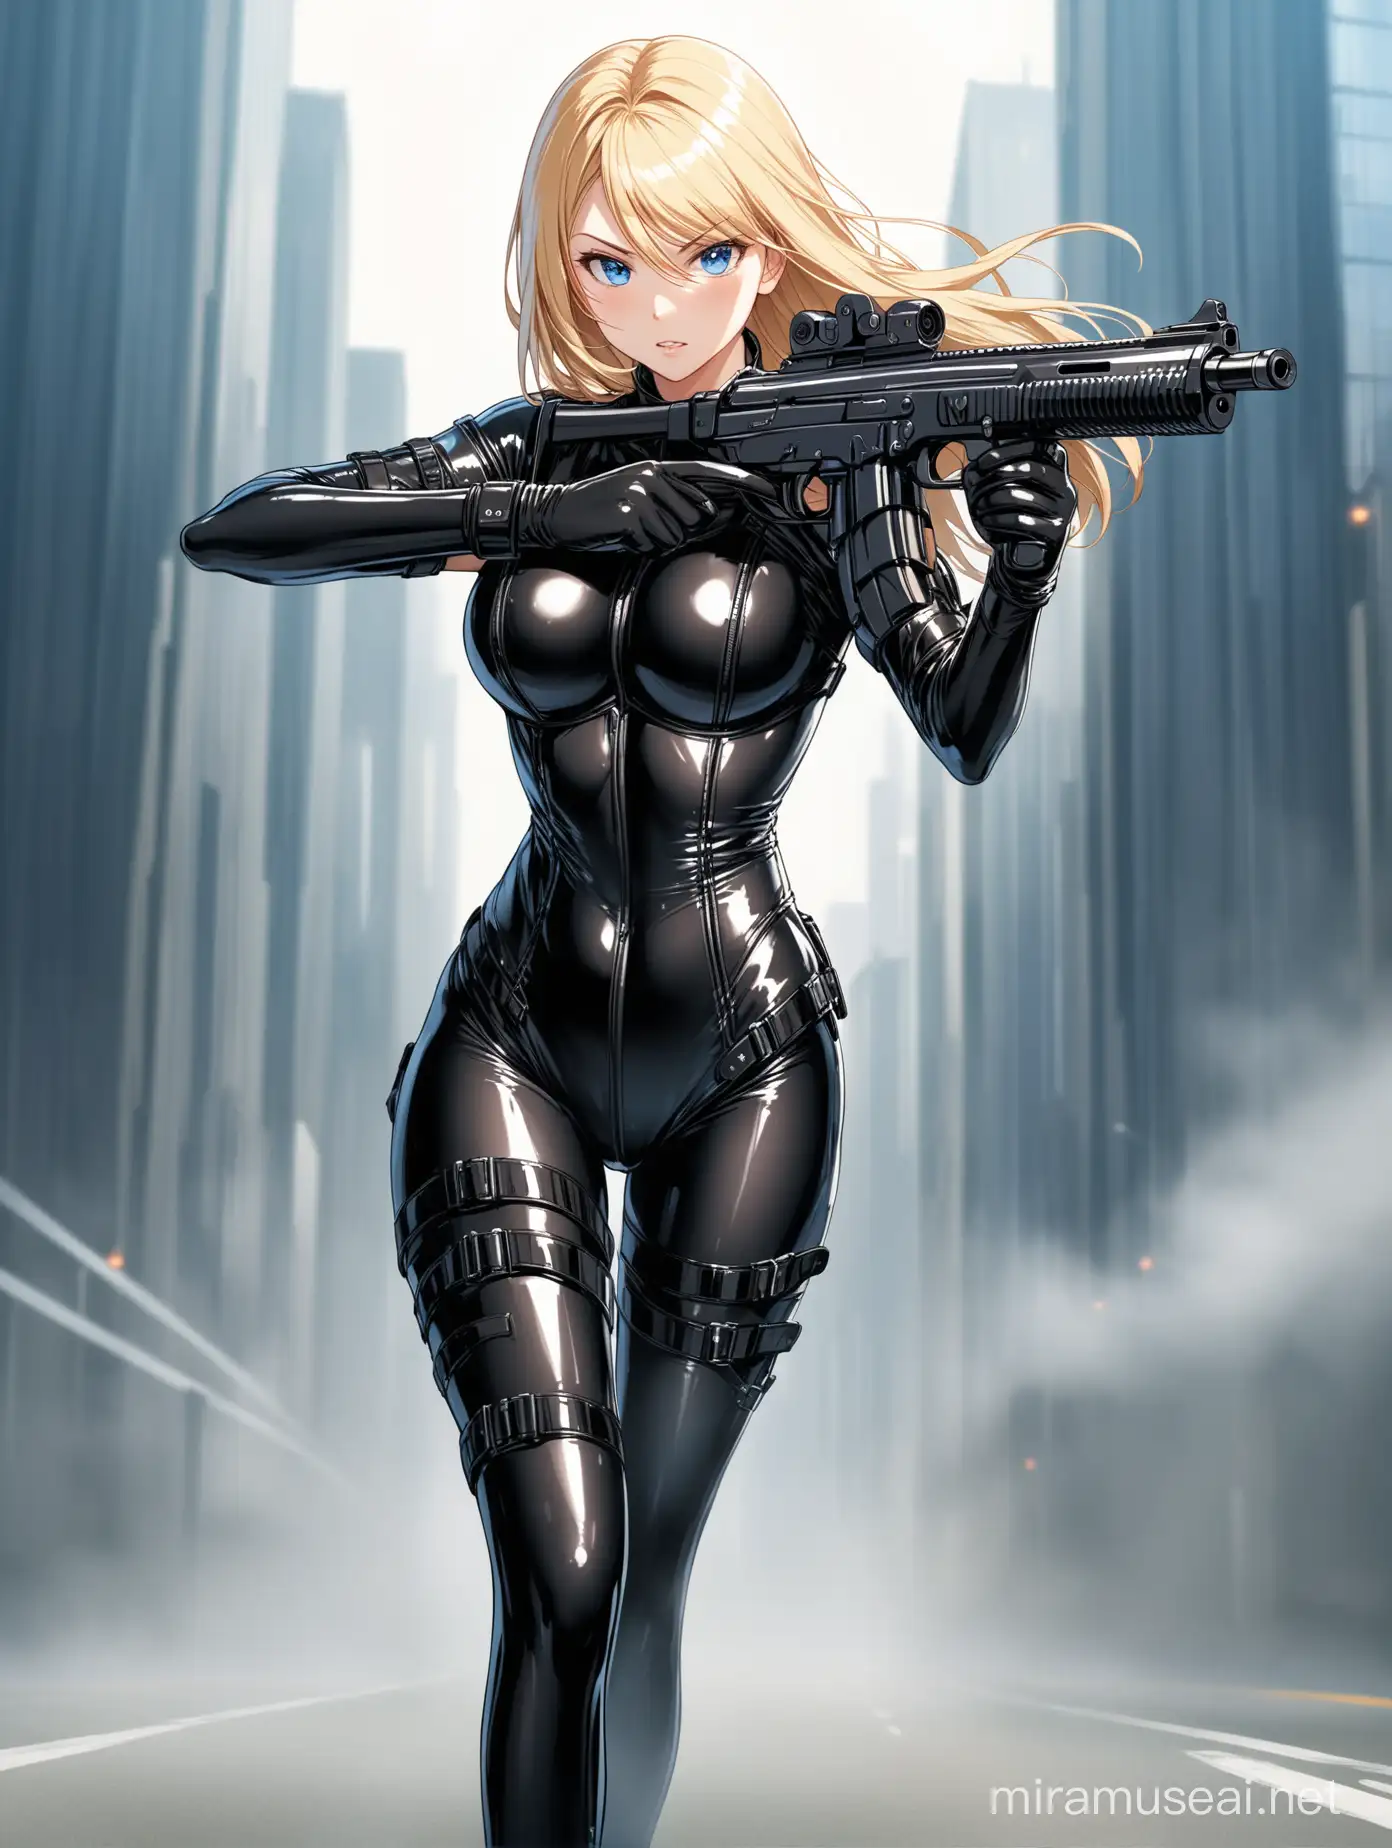 A pretty blond hair woman, assassin, shoulder length hair, blue eyes. holding s uzi 9mm both hands, aiming., standing upright. action pose. wearing a glossy black catsuit. neck collar, fetish corset. long gloves, arm straps. many belts. thigh straps. heavy rubber outfit. fetish wear. solo. ginning, running in a city.